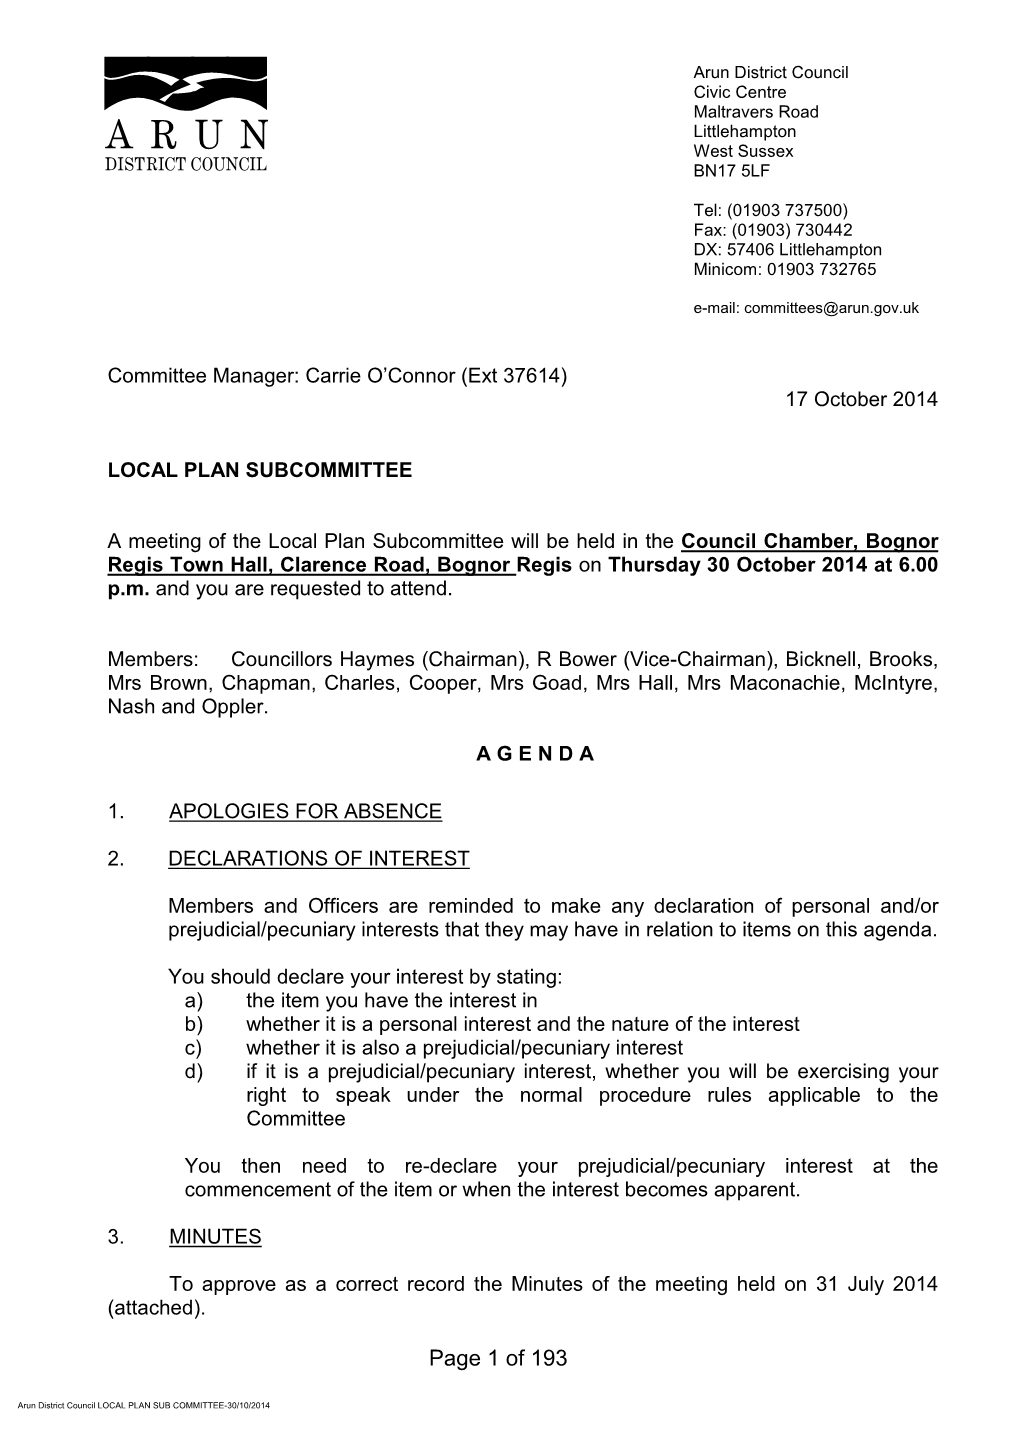 Of the Local Plan Subcommittee Will Be Held in the Council Chamber, Bognor Regis Town Hall, Clarence Road, Bognor Regis on Thursday 30 October 2014 at 6.00 P.M